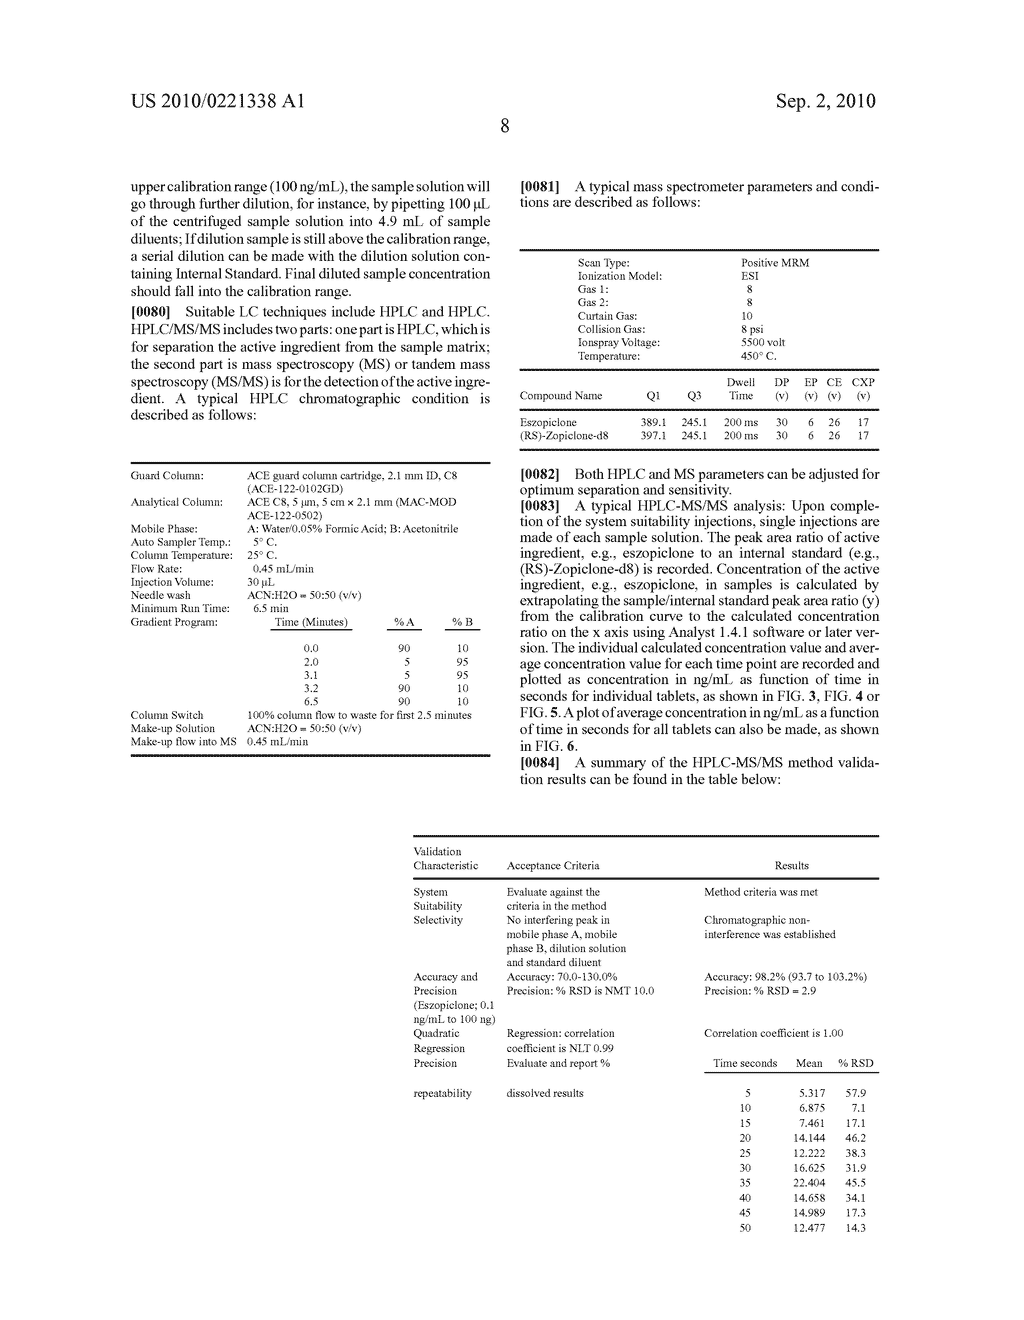 Coated Tablets Of 6-(5-Chloro-2-Pyridyl)-5-[(4-Methyl-1-Piperazinyl)Carbonyloxy]-7-Oxo-6,7-- Dihydro-5H-Pyrrolo[3,4-b]Pyrazine And Methods For Measuring Effectiveness Of Coating - diagram, schematic, and image 12